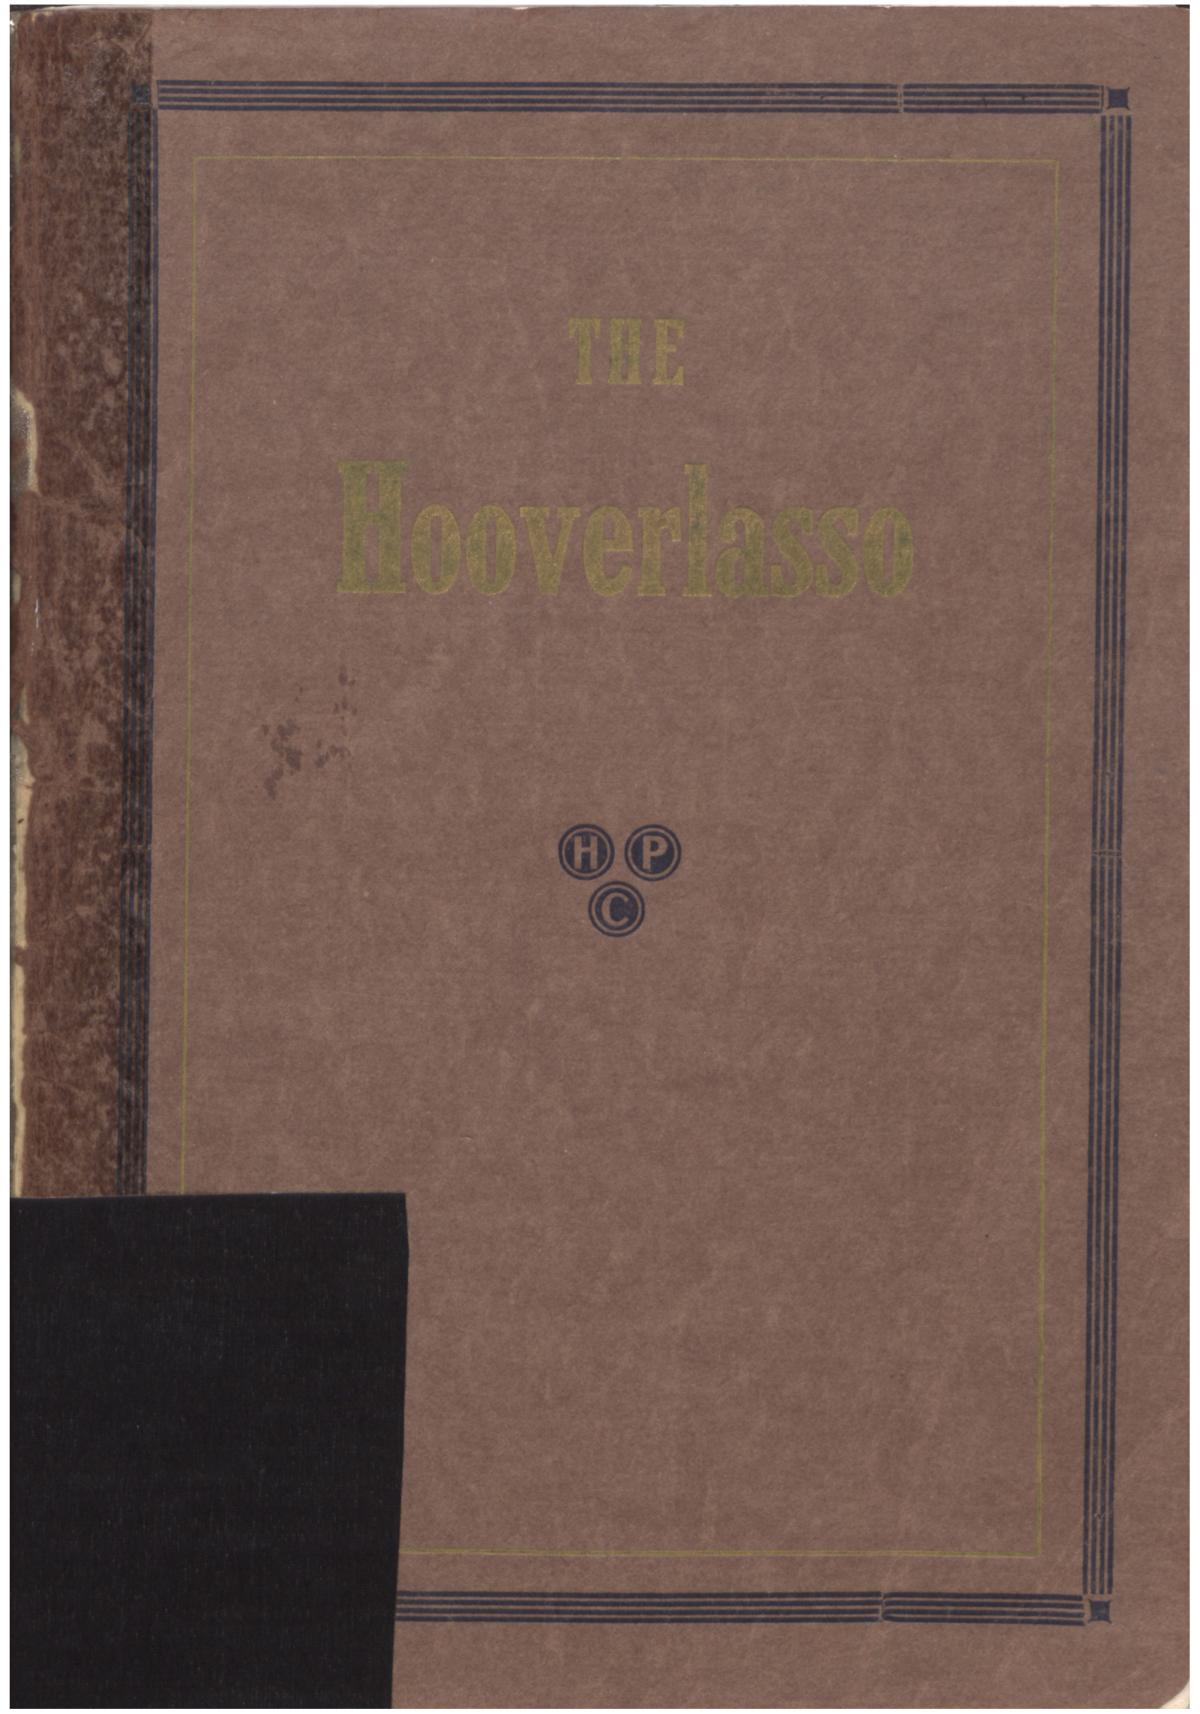 The Hooverlasso, Yearbook of Howard Payne College, 1918
                                                
                                                    Front Cover
                                                